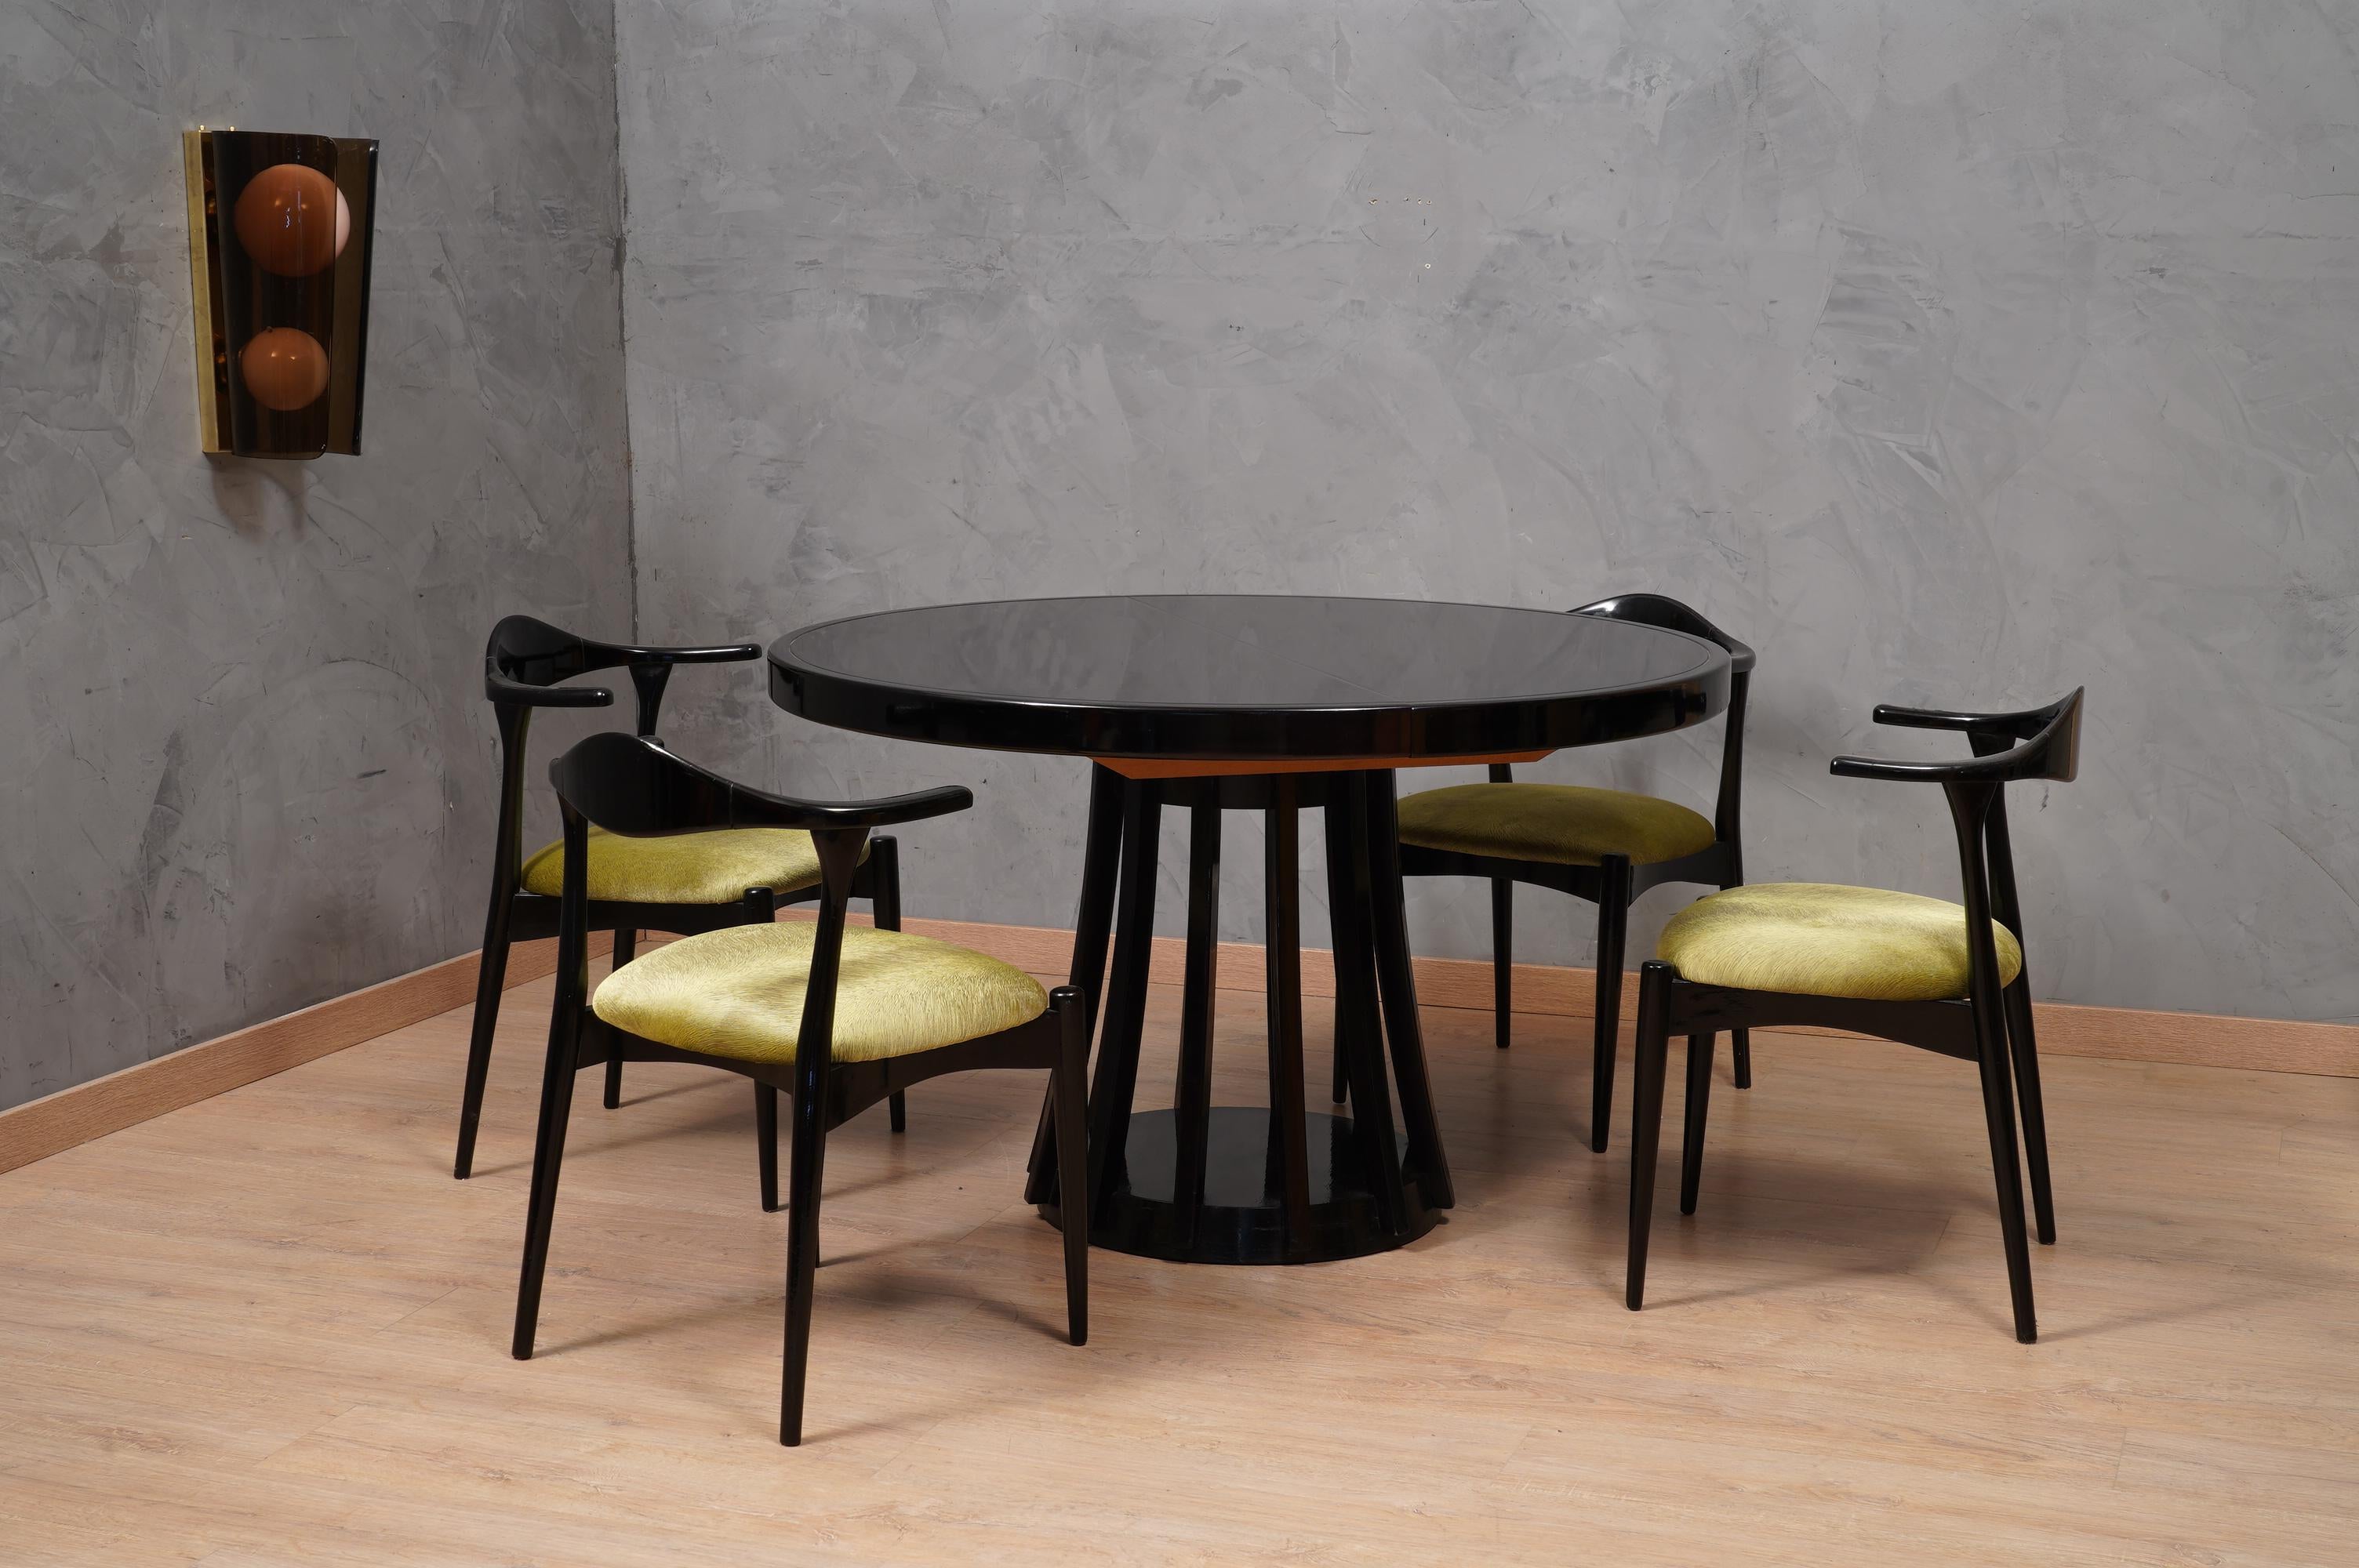 Simple materials but fantastic and unique design for these 4 chairs by Danish Manufacture. Truly magnificent in shape. Linear and clean design, but at the same time amazing for the combination of materials used.

The chair has a structure entirely